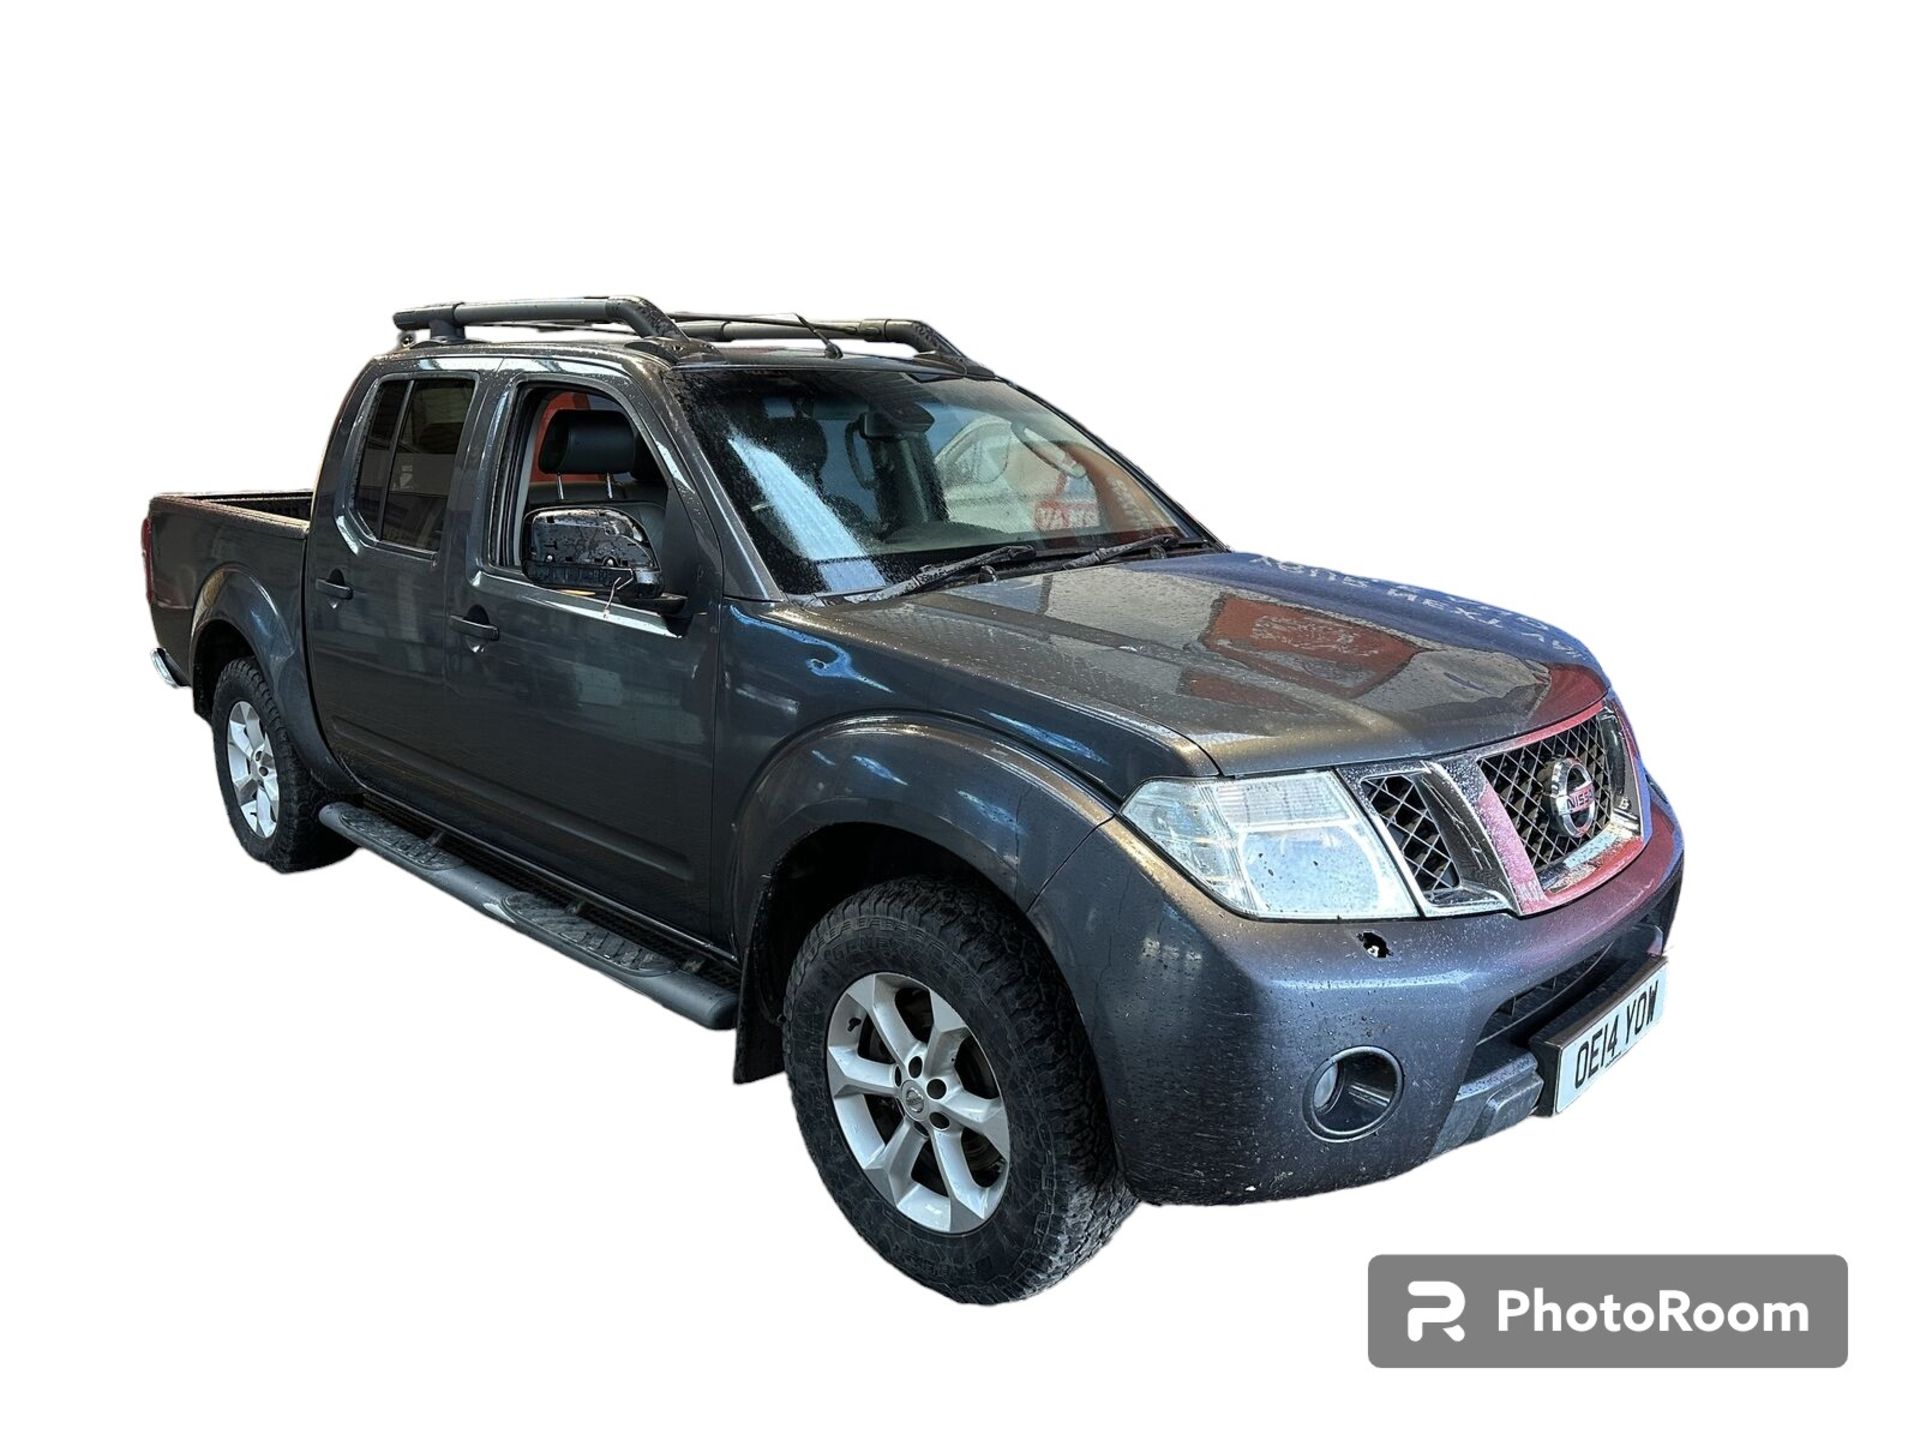 2014 NAVARA DOUBLE CAB - TURBO REPLACEMENT NEEDED >>--NO VAT ON HAMMER--<< - Image 2 of 10